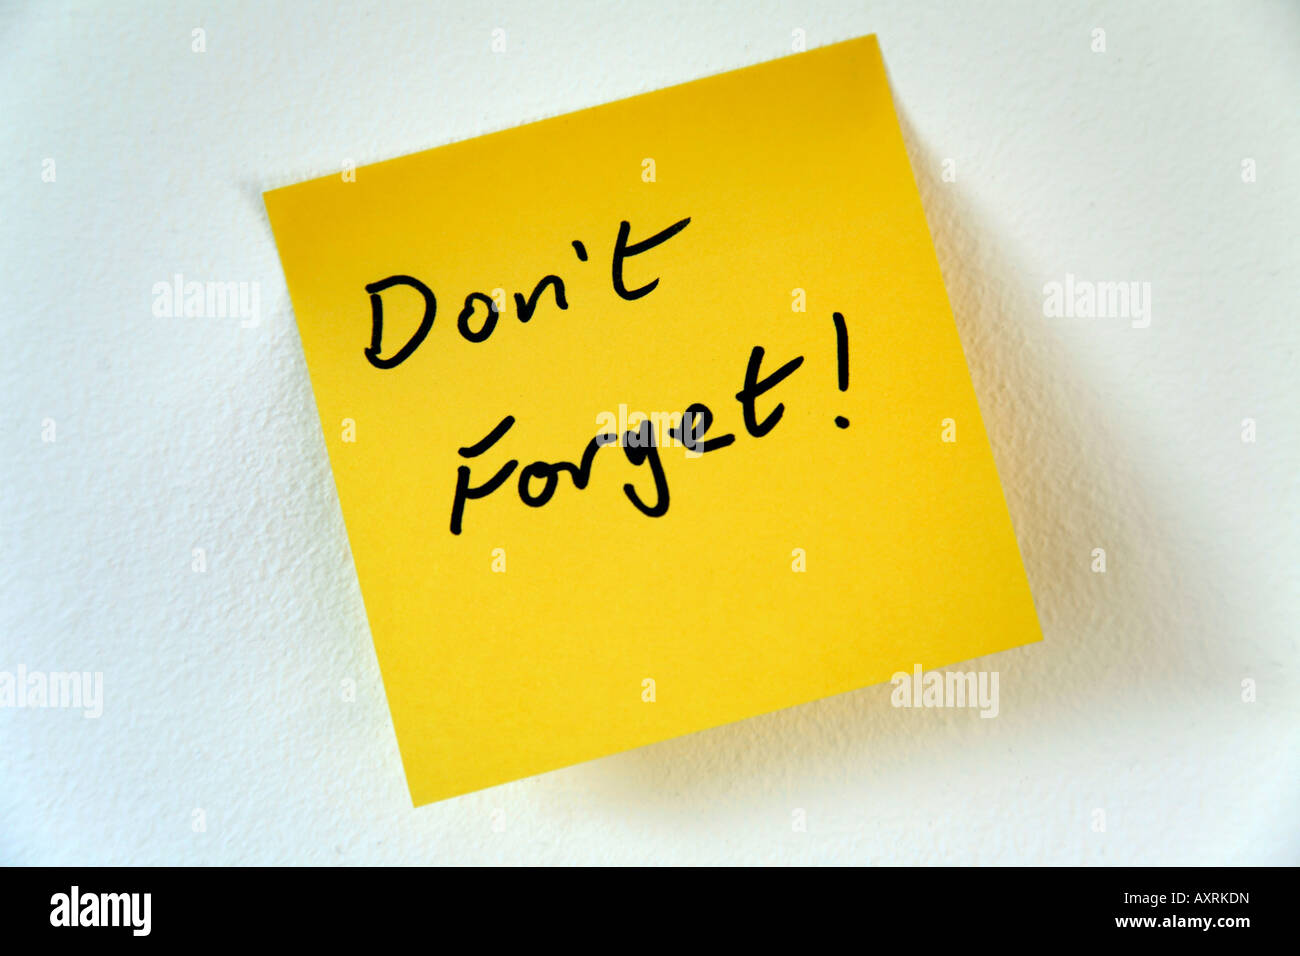 Don't Forget reminder note Stock Photo